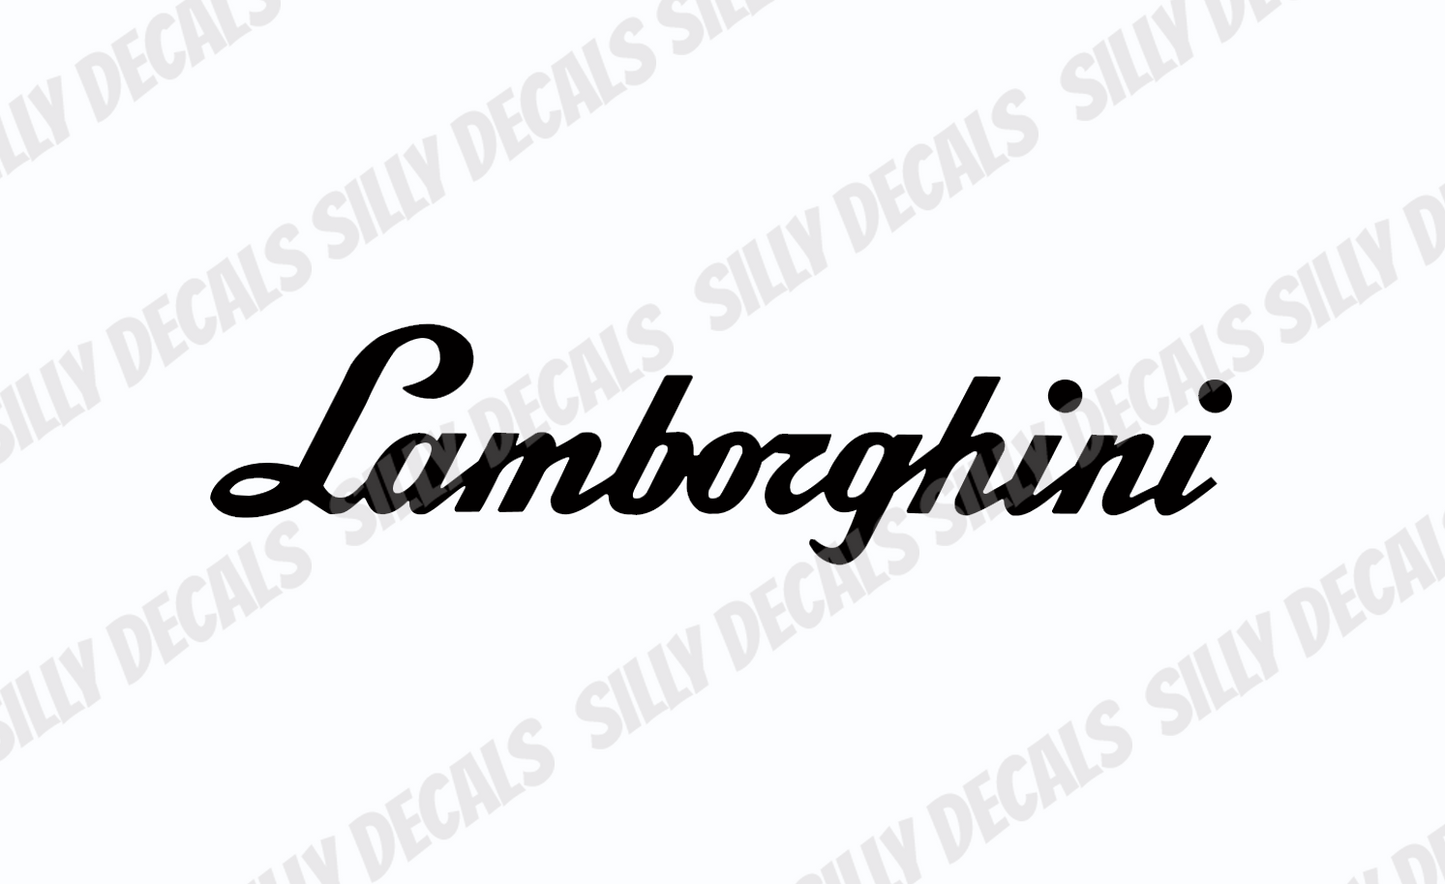 Exotic Windshield Banner; Vinyl Decals Suitable For Cars, Windows, Walls, and More!